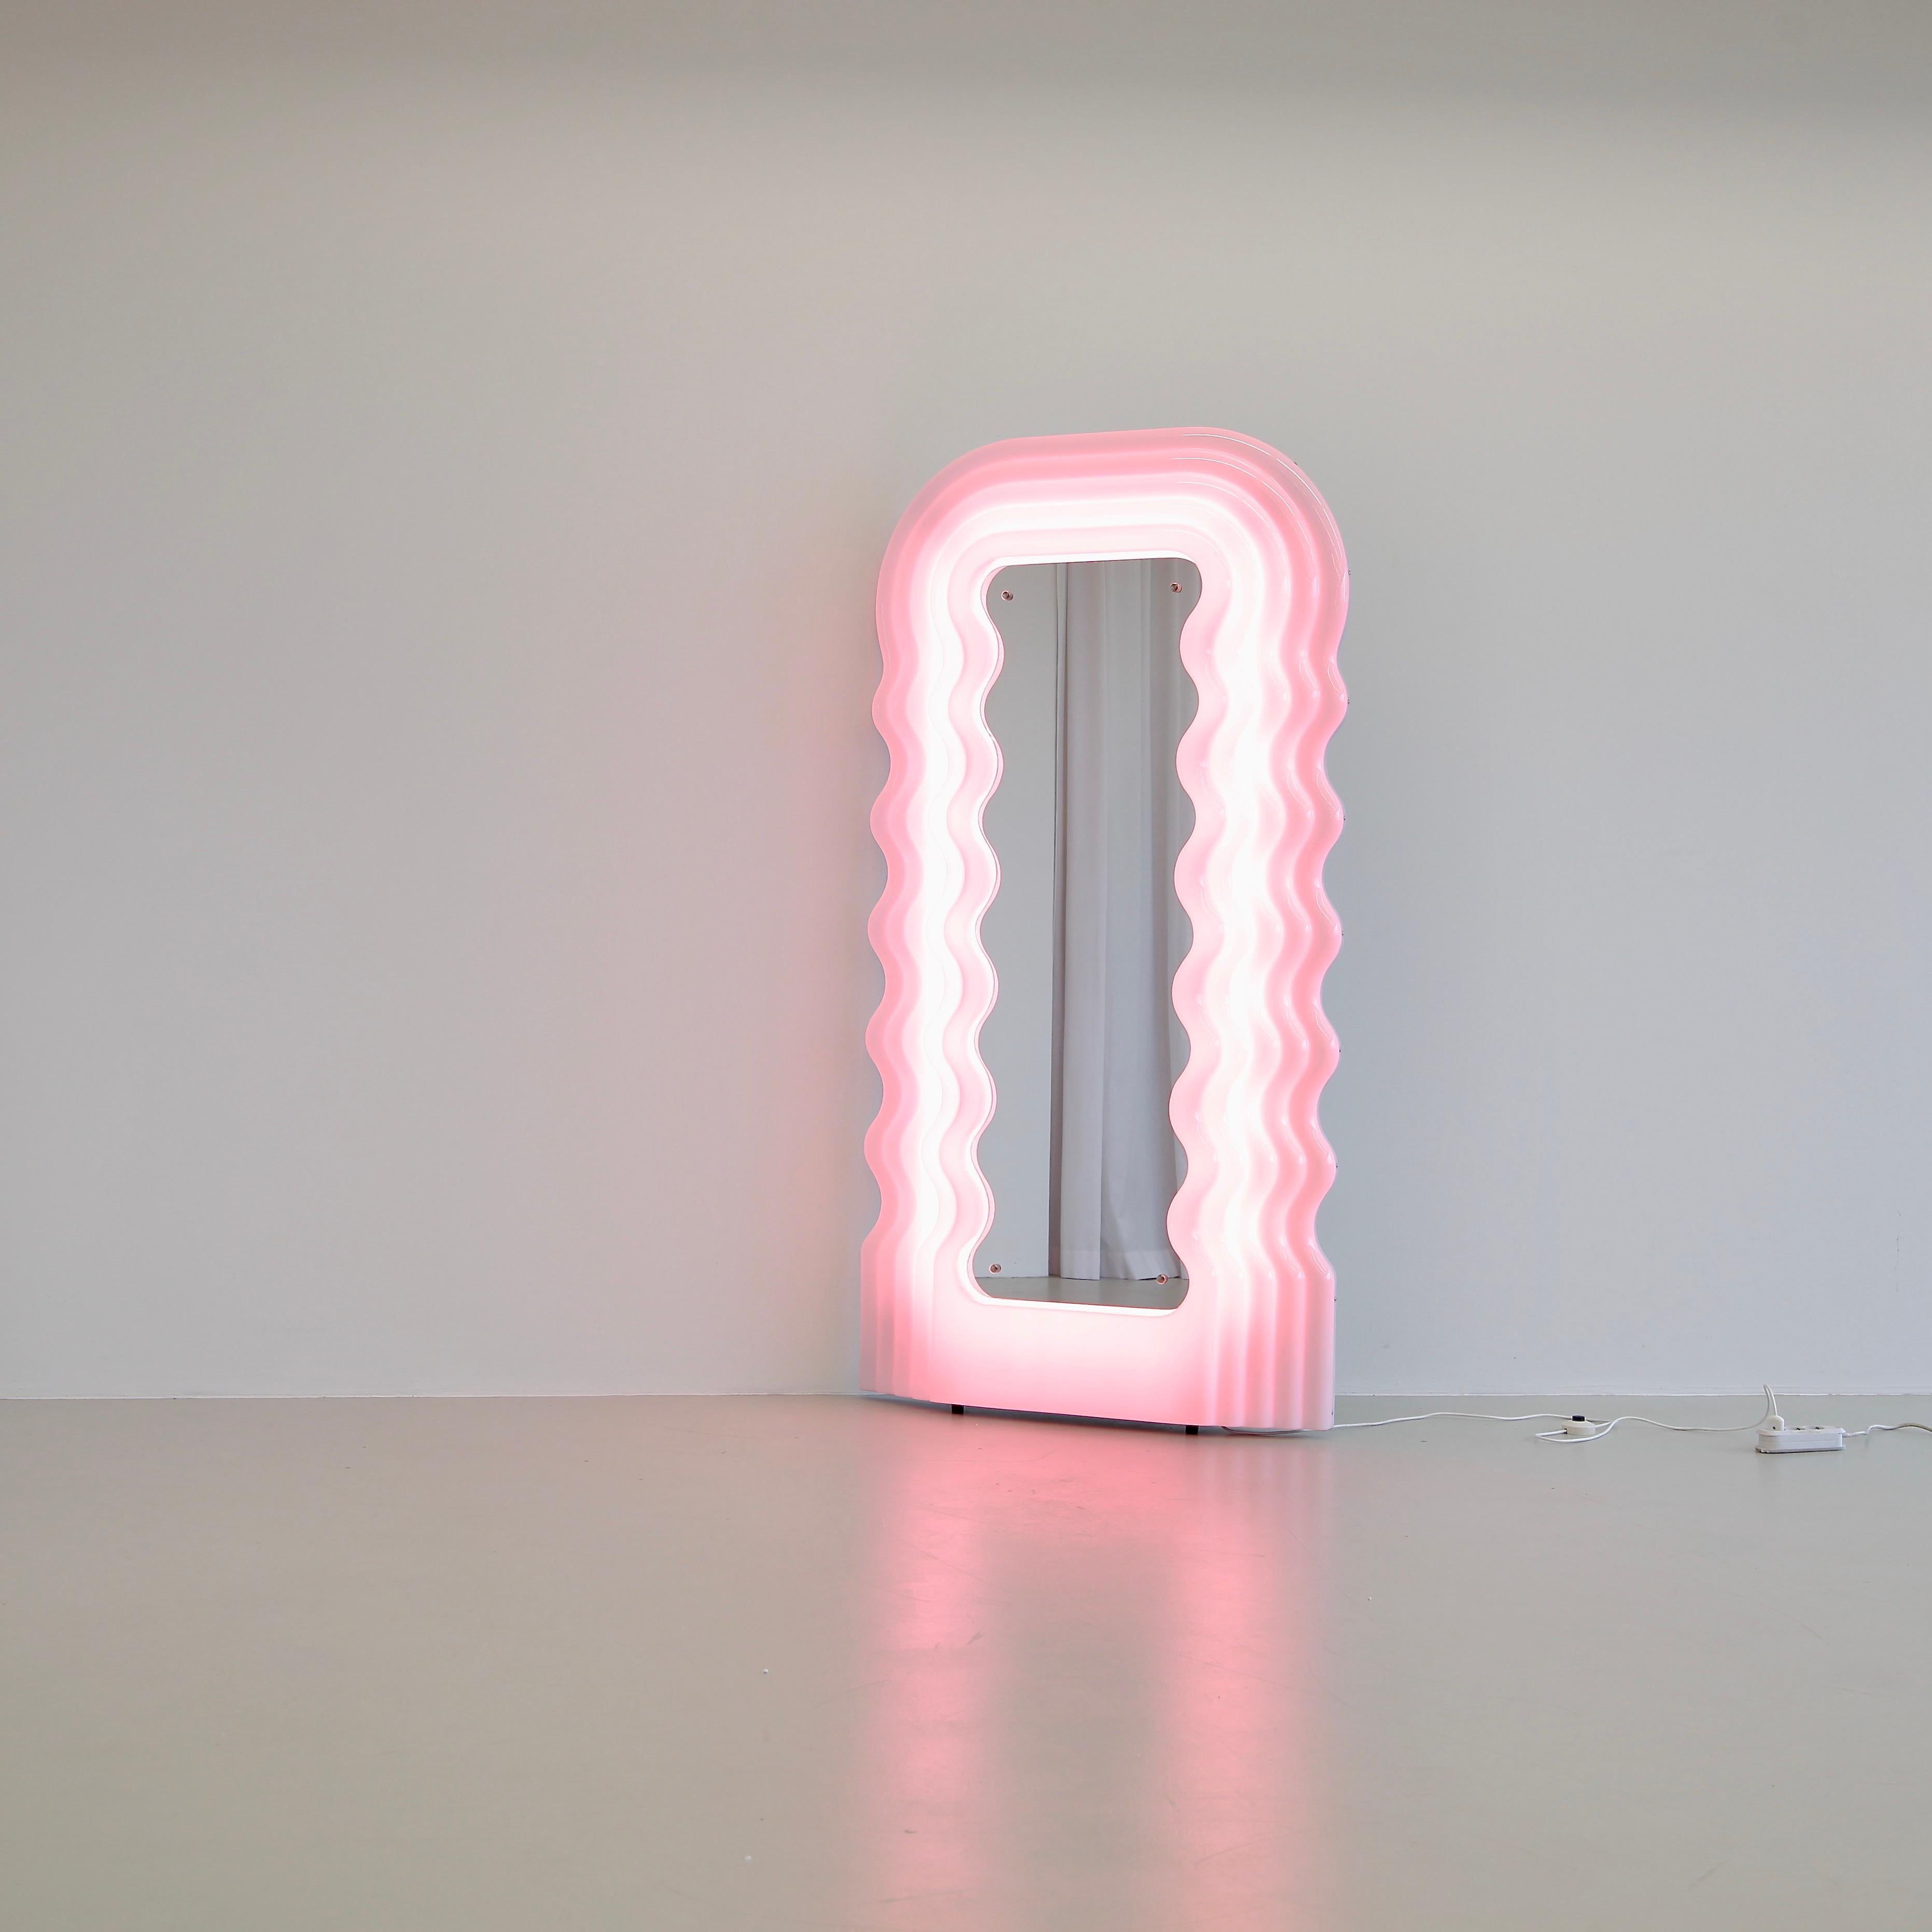 Ultrafragola mirror, designed by Ettore Sottsass in the 1970s.

Original recent production mirror using LED lighting, made of moulded fibreglass with hard-back and shaped mirror. The frame is white, turning pink when the light is switched on.